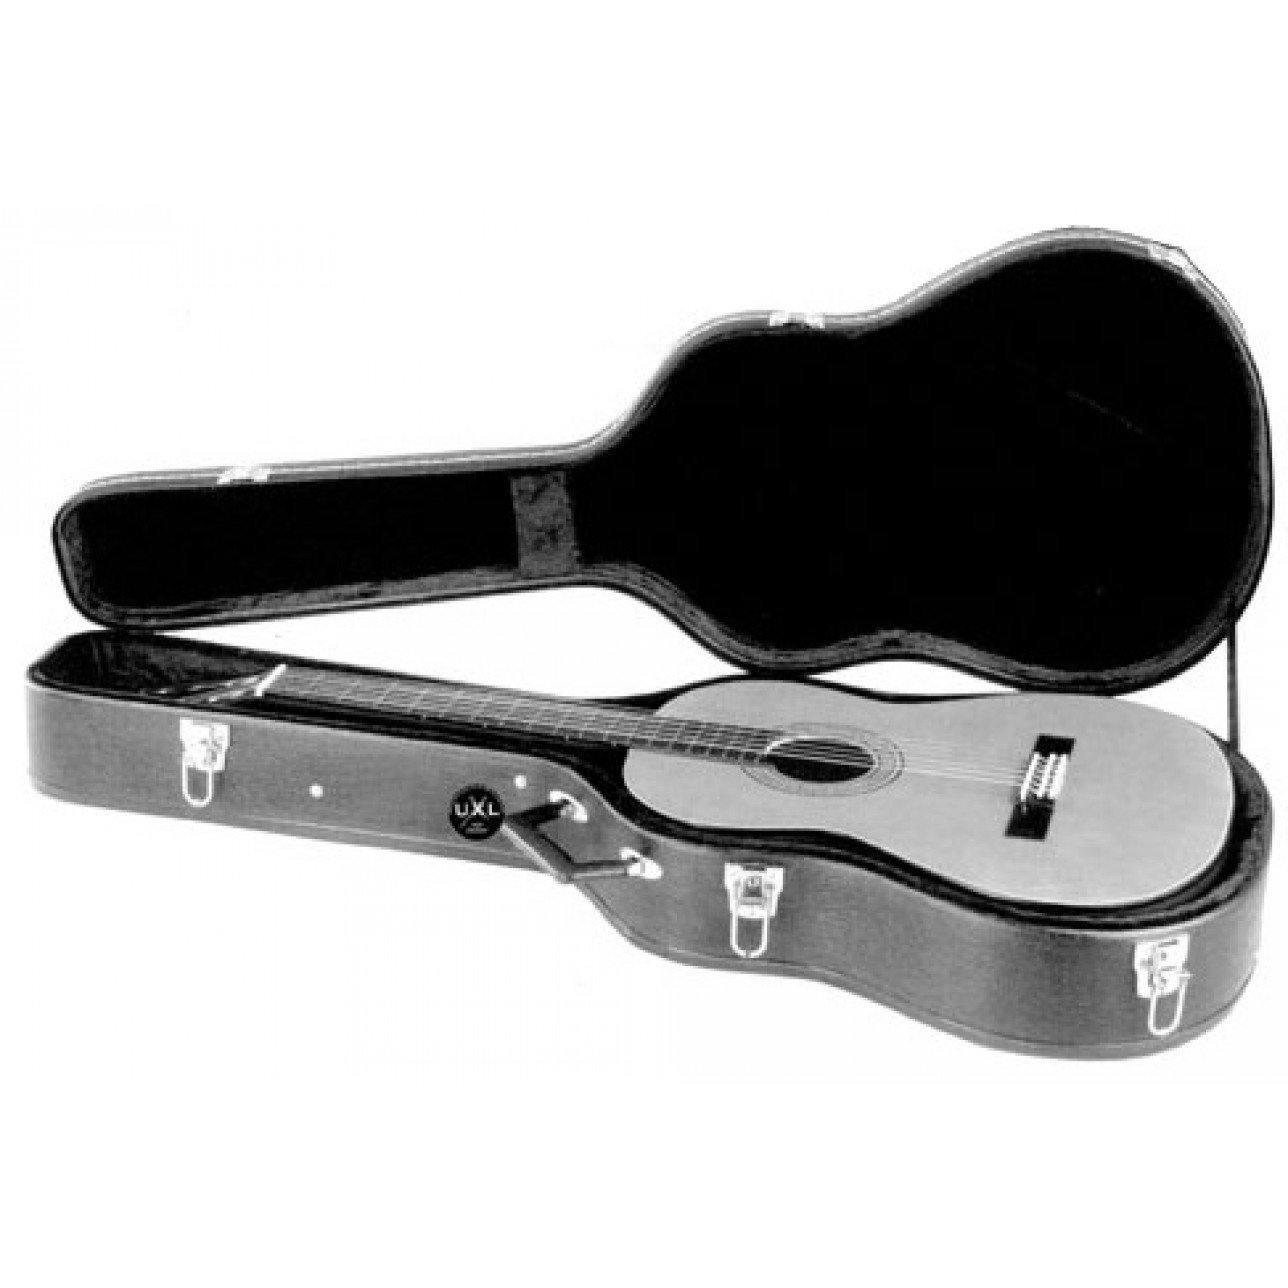 Classical Guitar Case Plywood Black Vinyl Covered - Cases & Bags by V-Case at Muso's Stuff